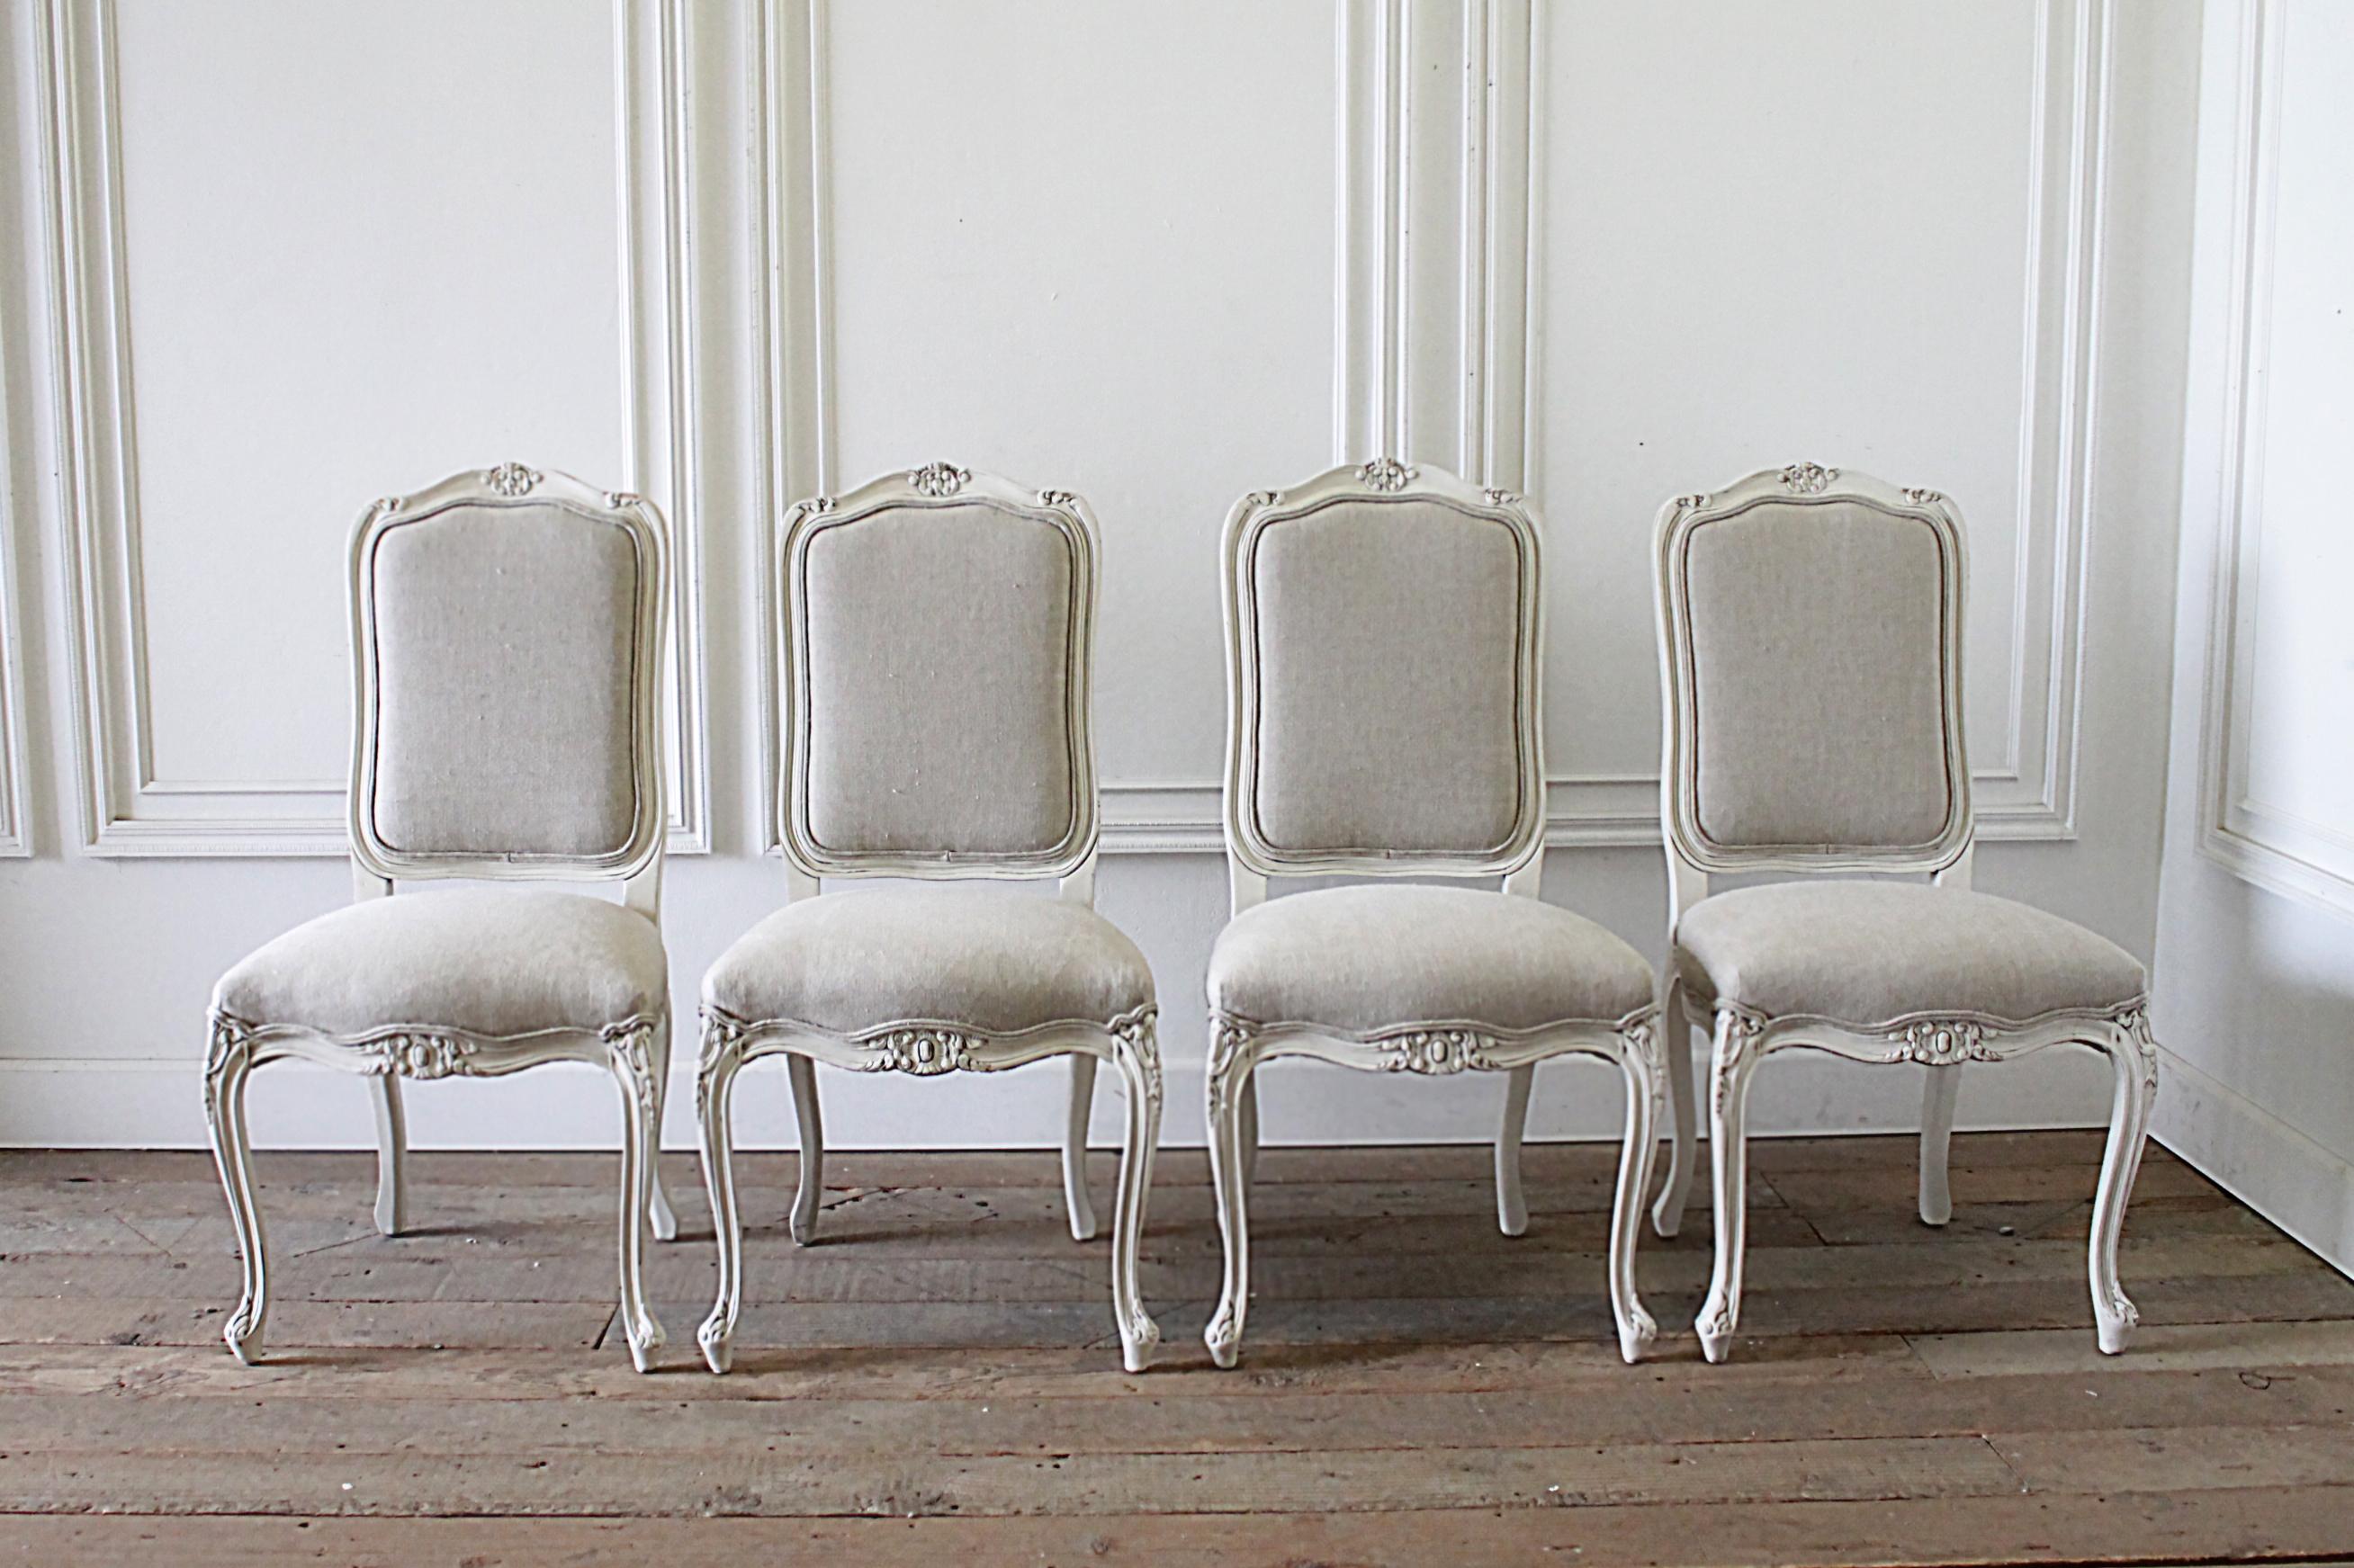 20th century set of 6 French Country painted and linen upholstered dining chairs
Painted in our oyster white finish, with subtle distressed edges, and finished with an antique glazed patina, these French Country dining chairs are solid and sturdy